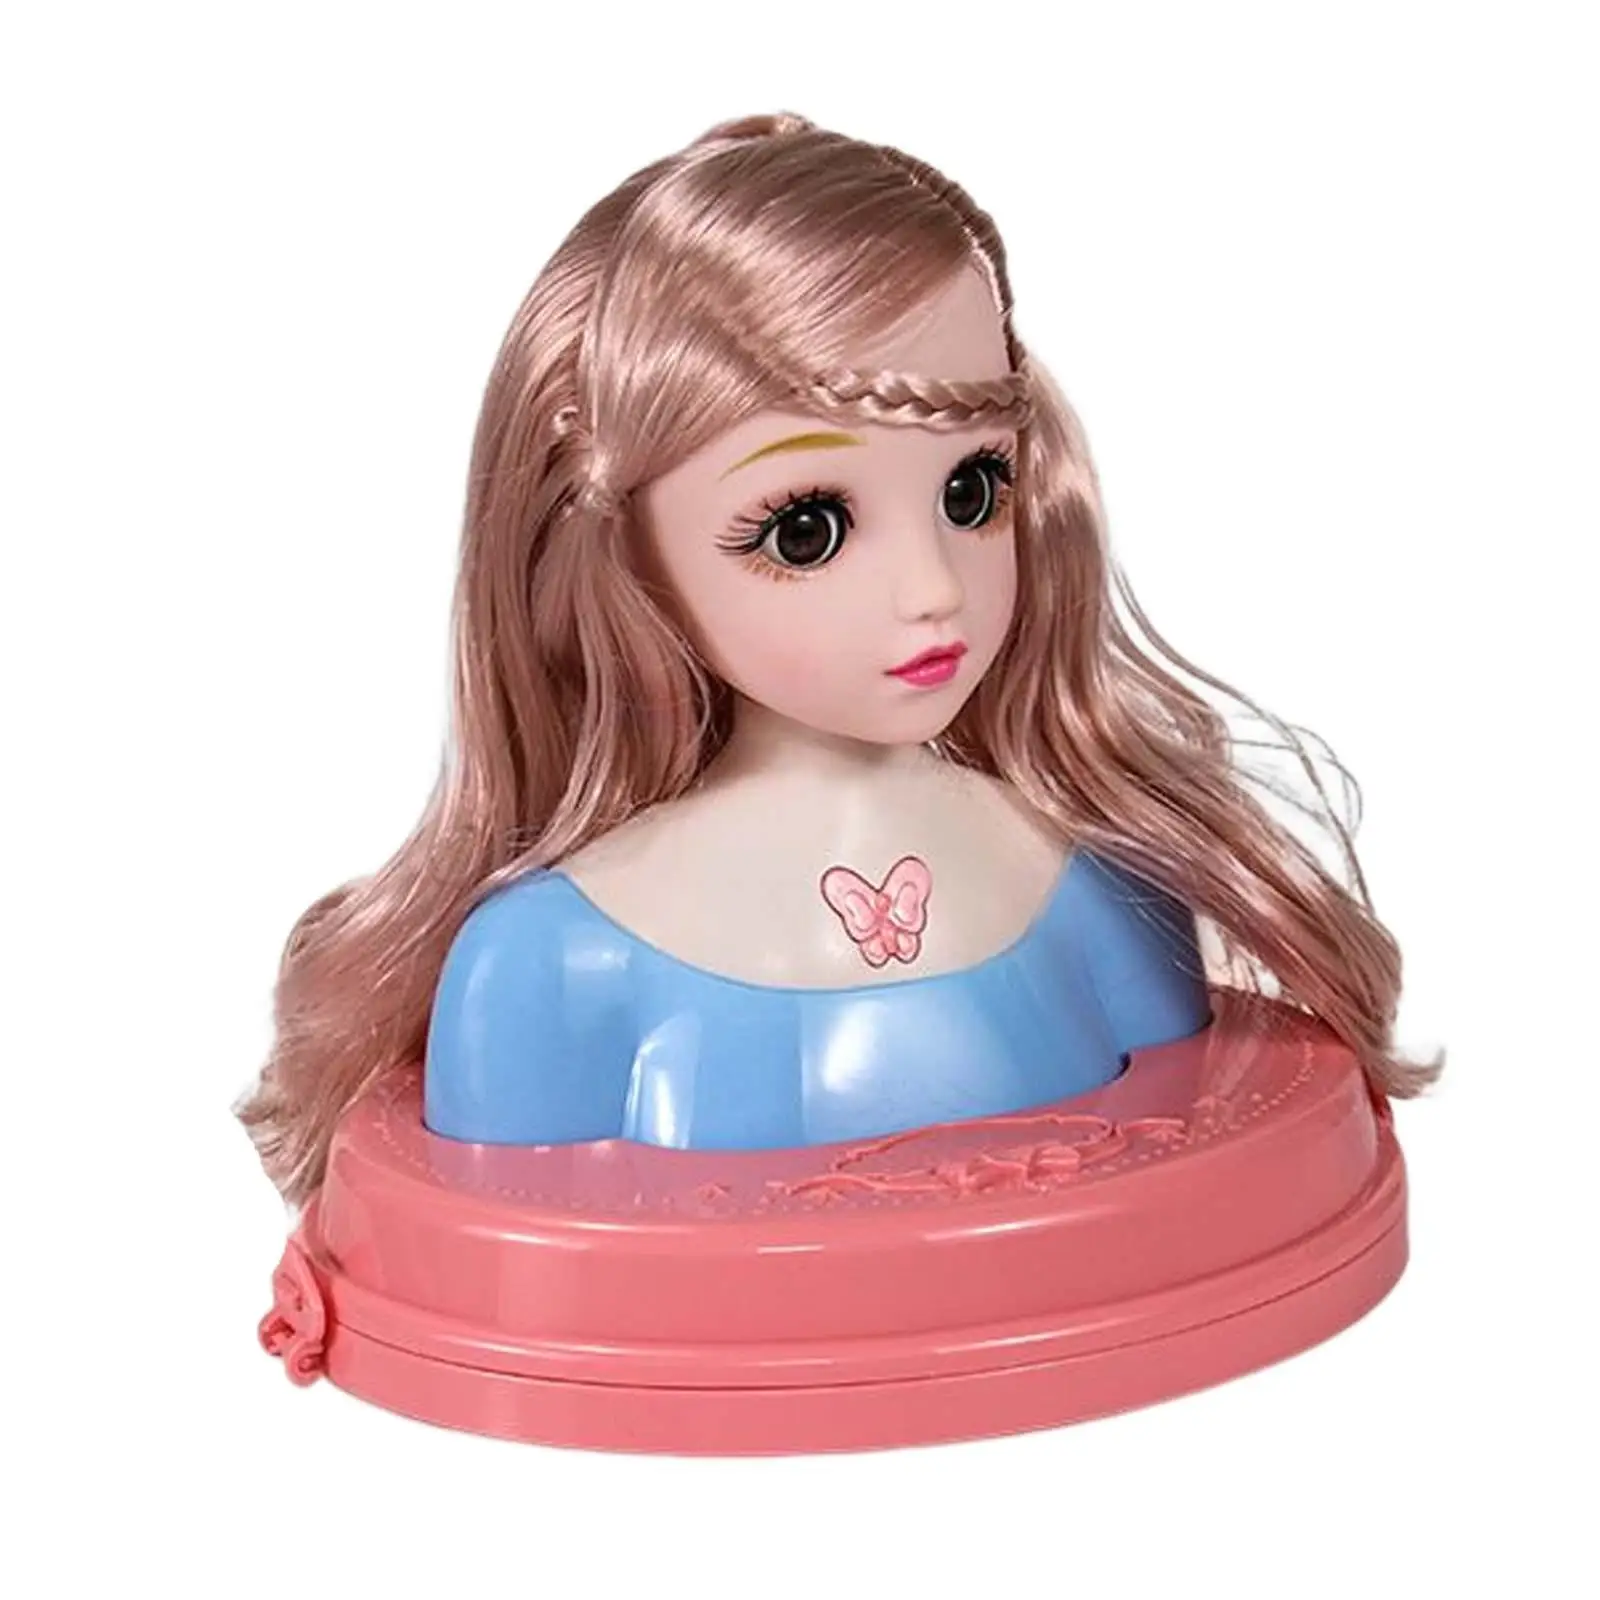 Fashion Doll Styling Head Toy Movable Eyelids Princess Doll Makeup Dolls Playset for Girls Children Kids Birthday Gifts